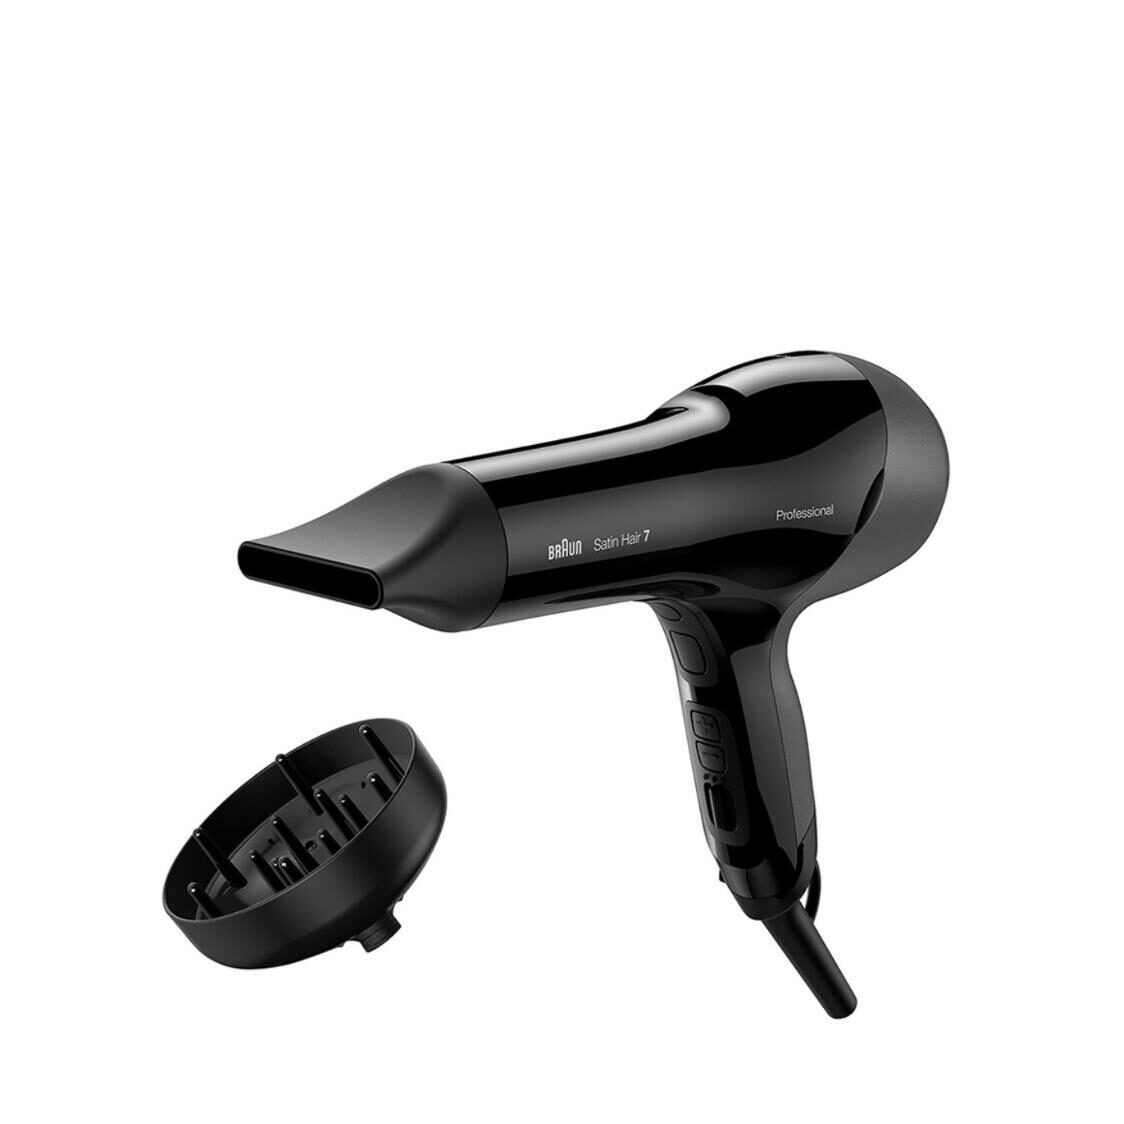 BRAUN Satin Hair 7 HD 785 IONTEC Ionic Hair Dryer Ions with Temperature and Airflow Speed Setting